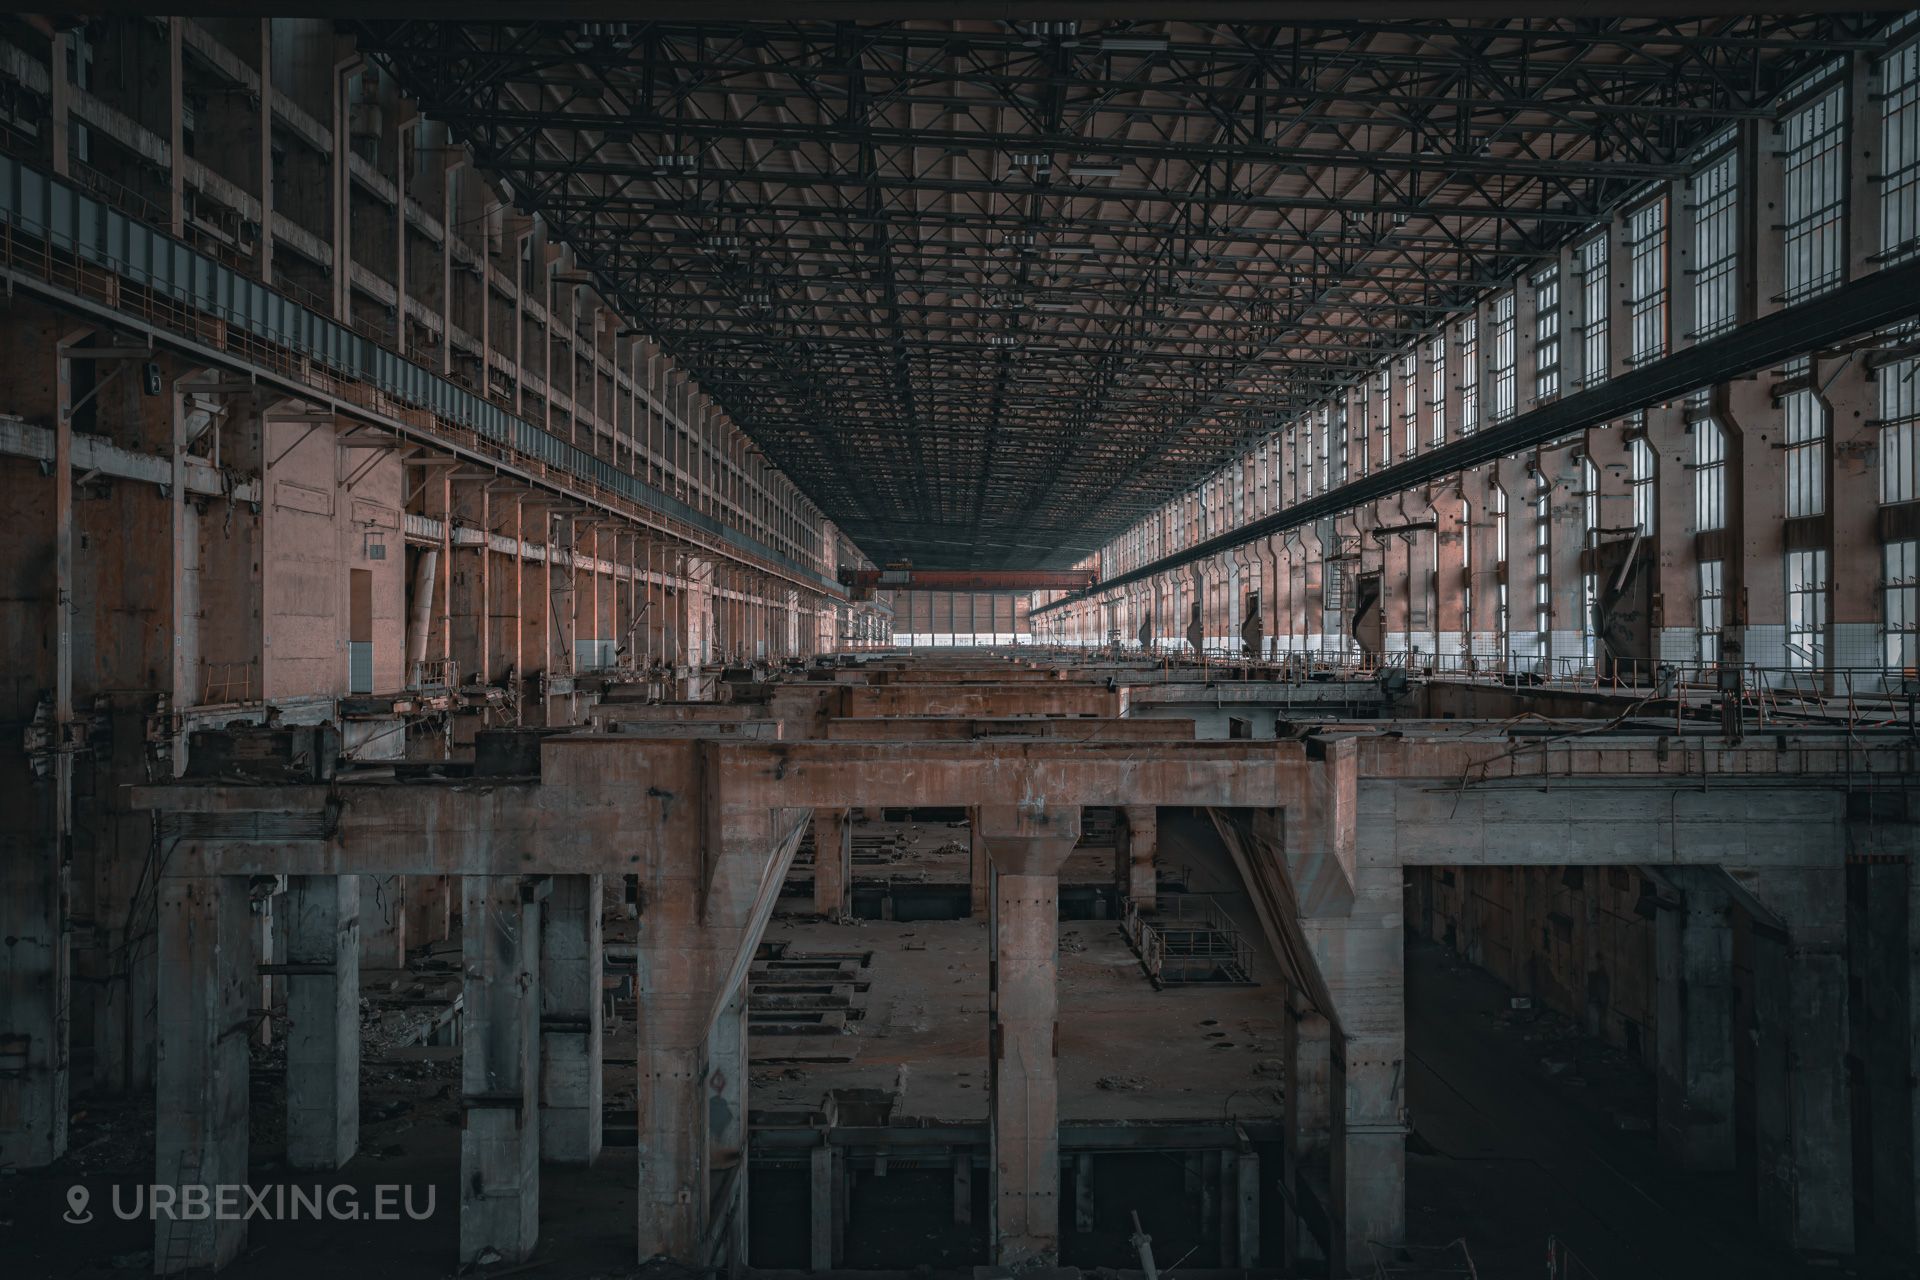 a photo of the empty turbine hall inside a former power plant; the name of the power plant is kraftwerk b